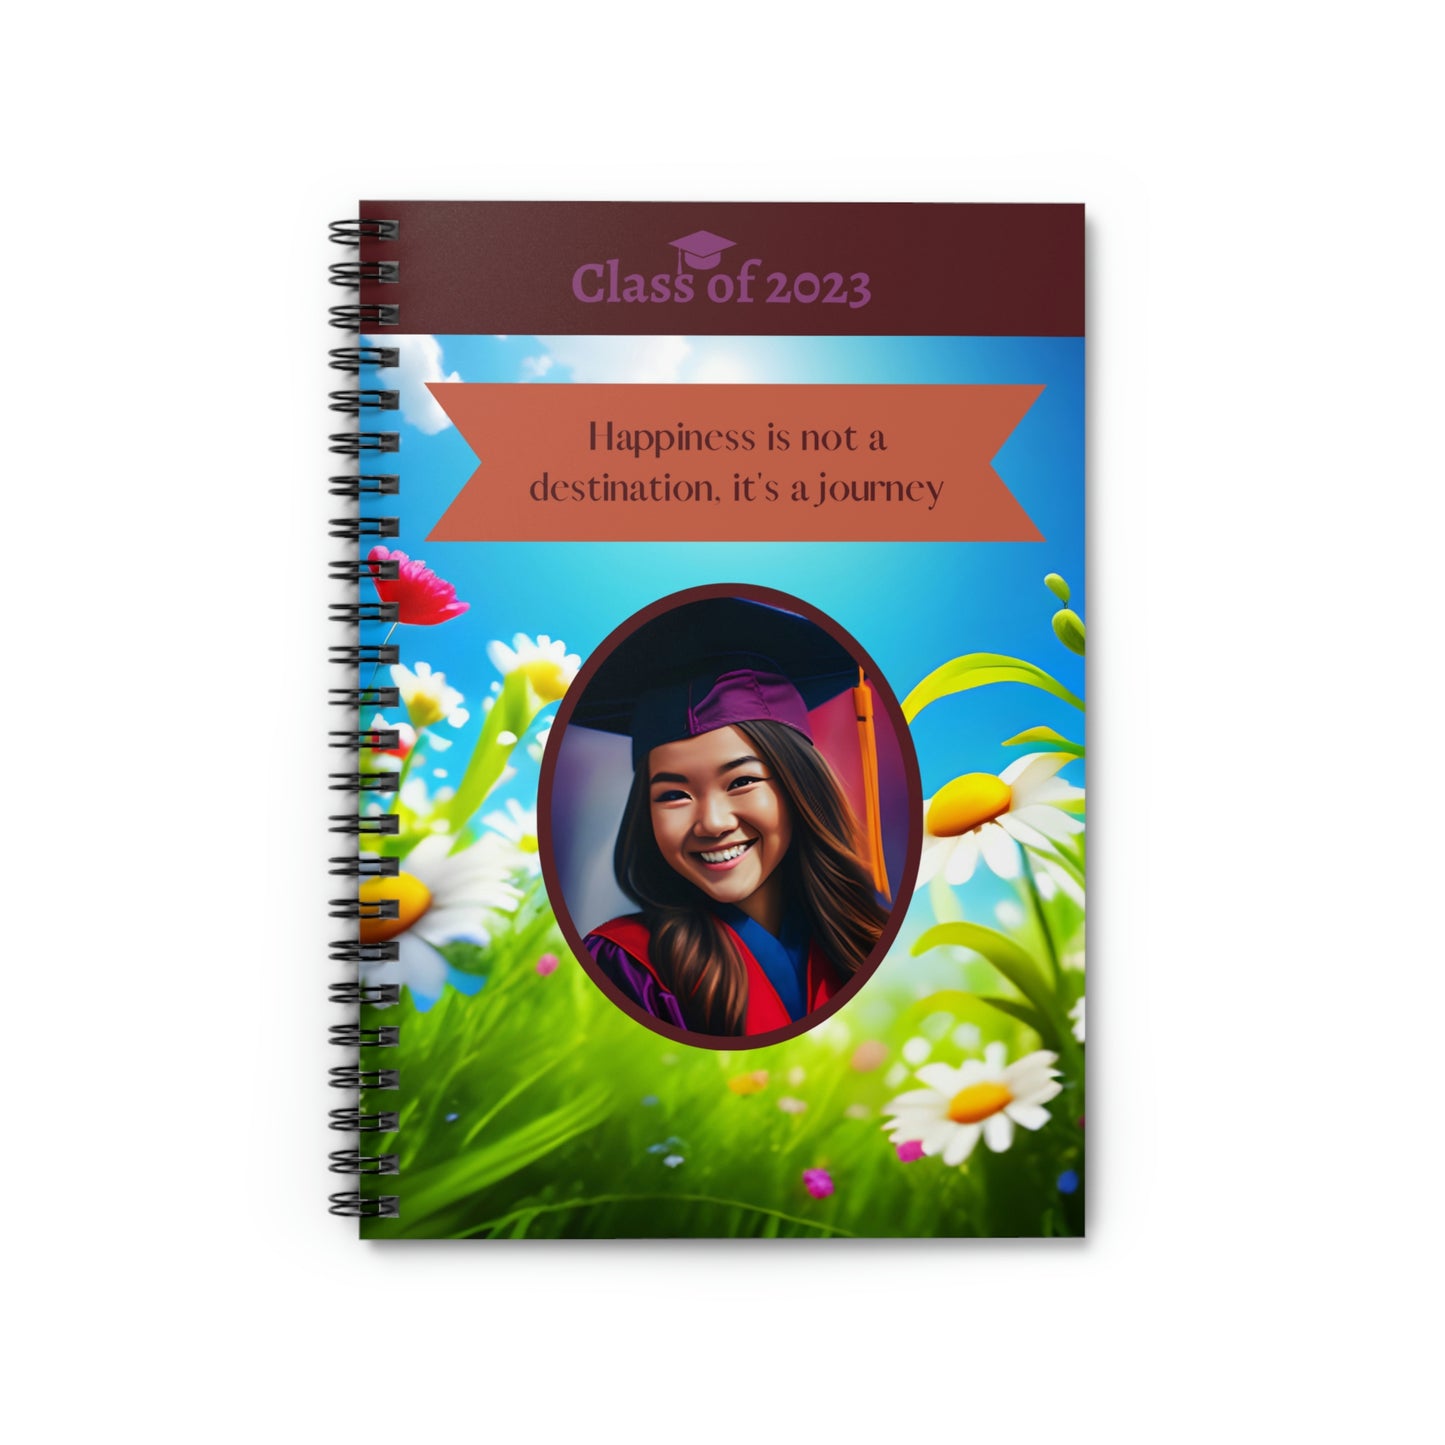 Class of 2023 Graduate Journal - (Asian Young Lady 1) - Ruled Line